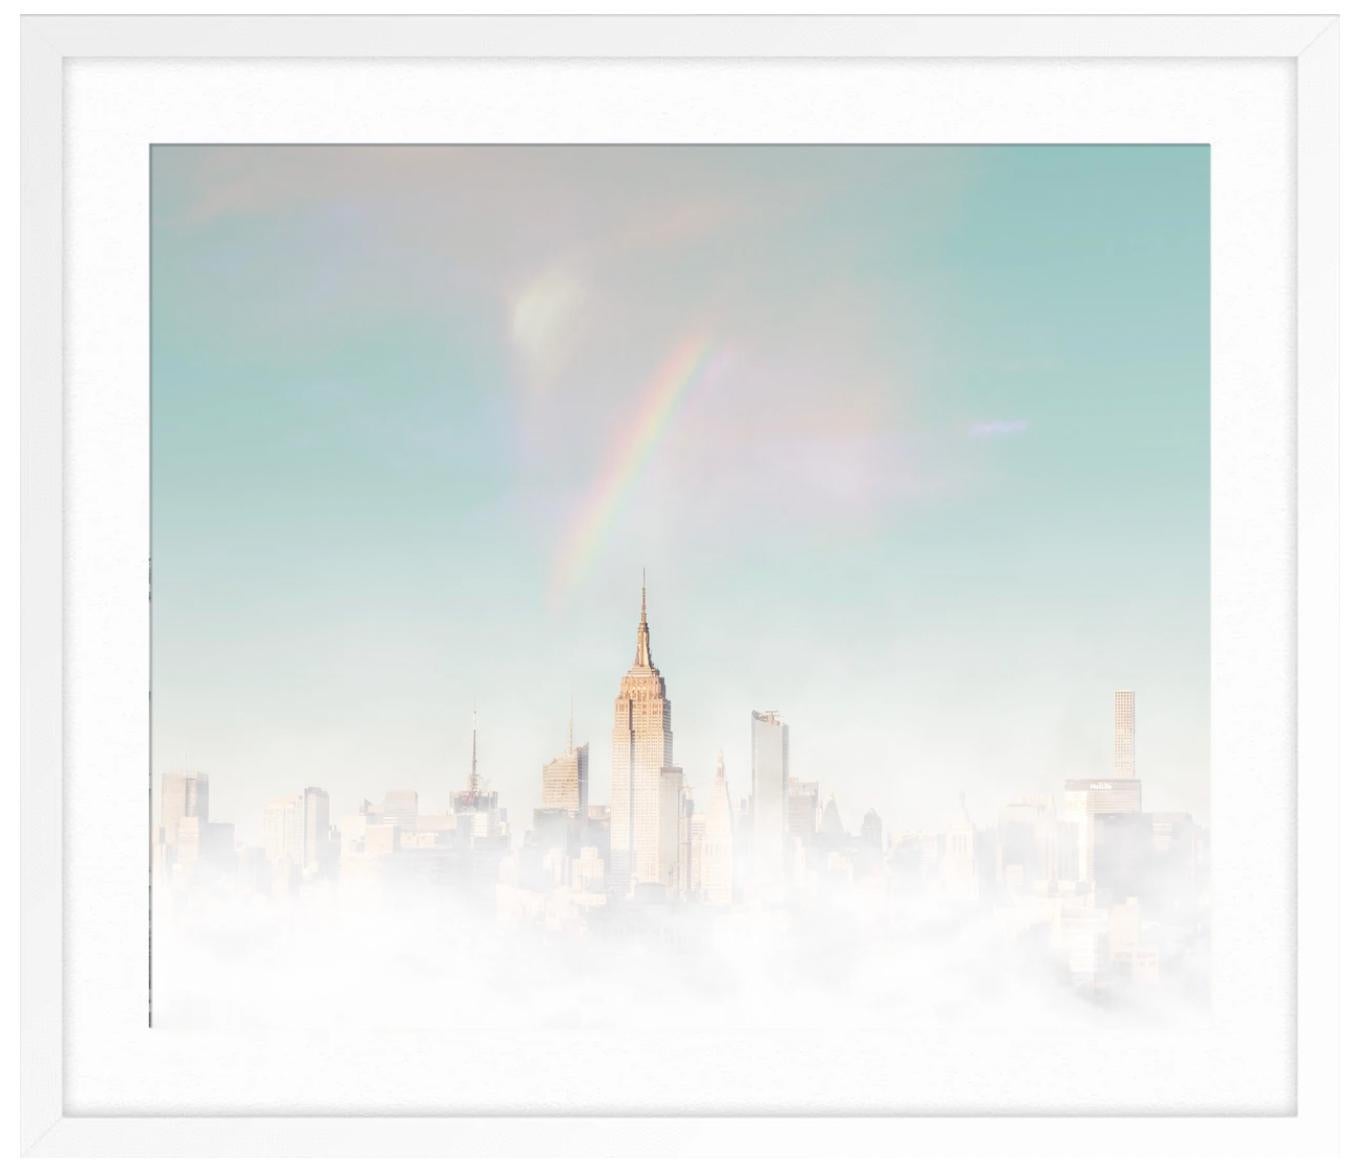 New York Rainbow - Gray Landscape Photograph by Ludwig Favre